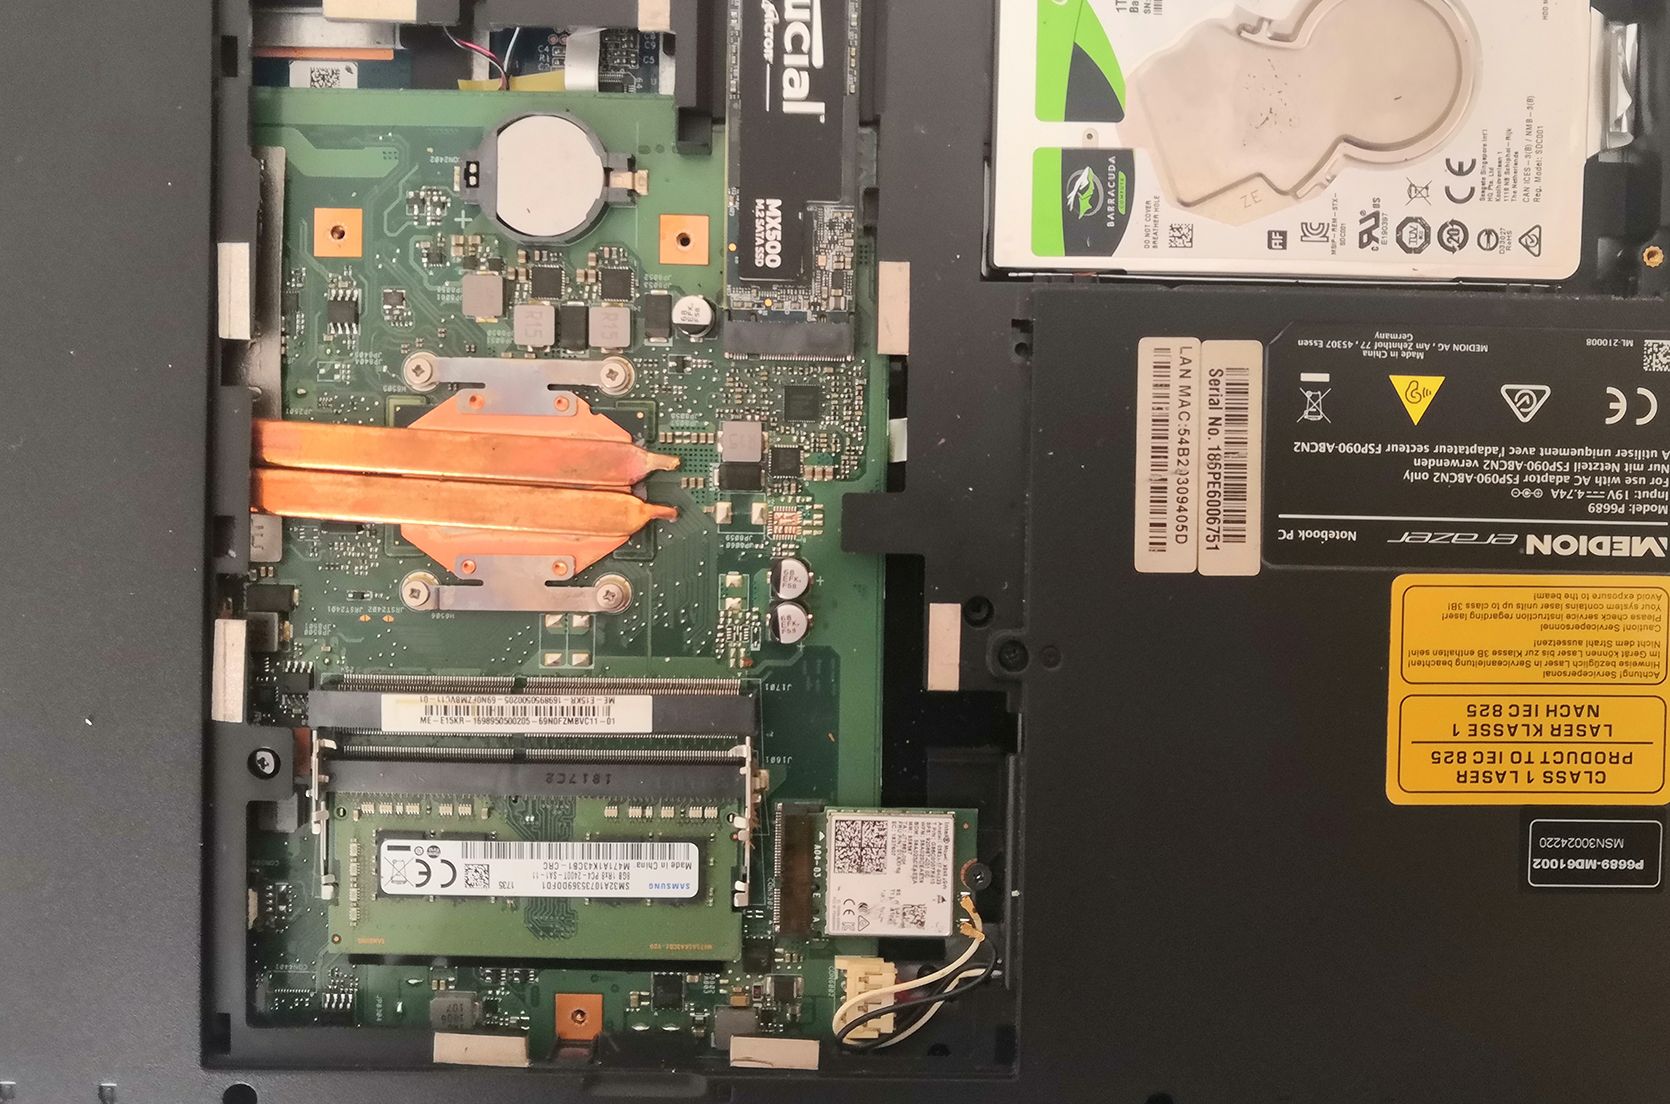 Laptop with access panel removed